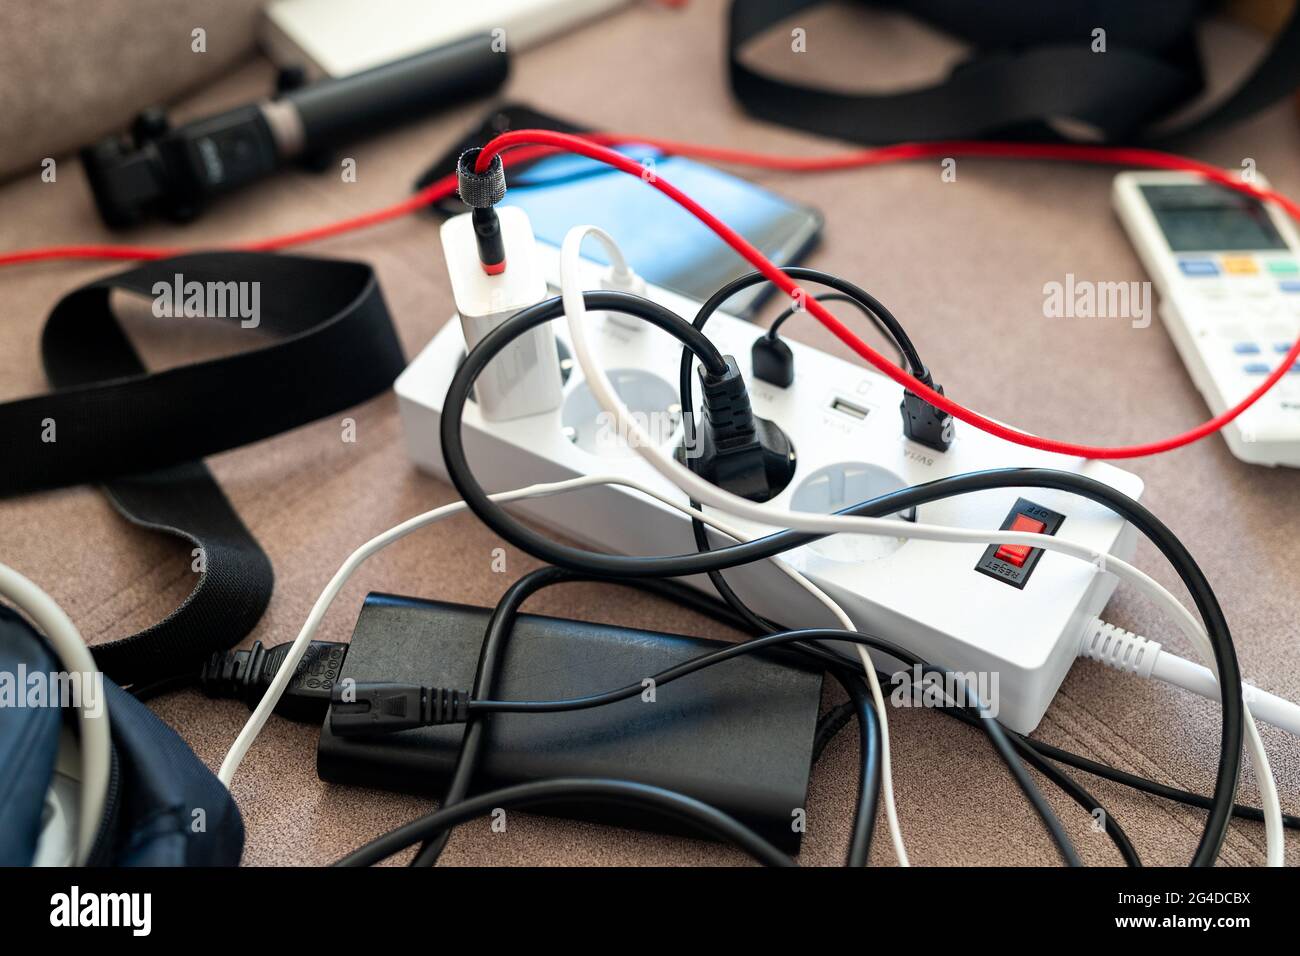 Overloaded power socket plug extendion at home. Tangled cords of home appliances and chargins gadgets mess Stock Photo